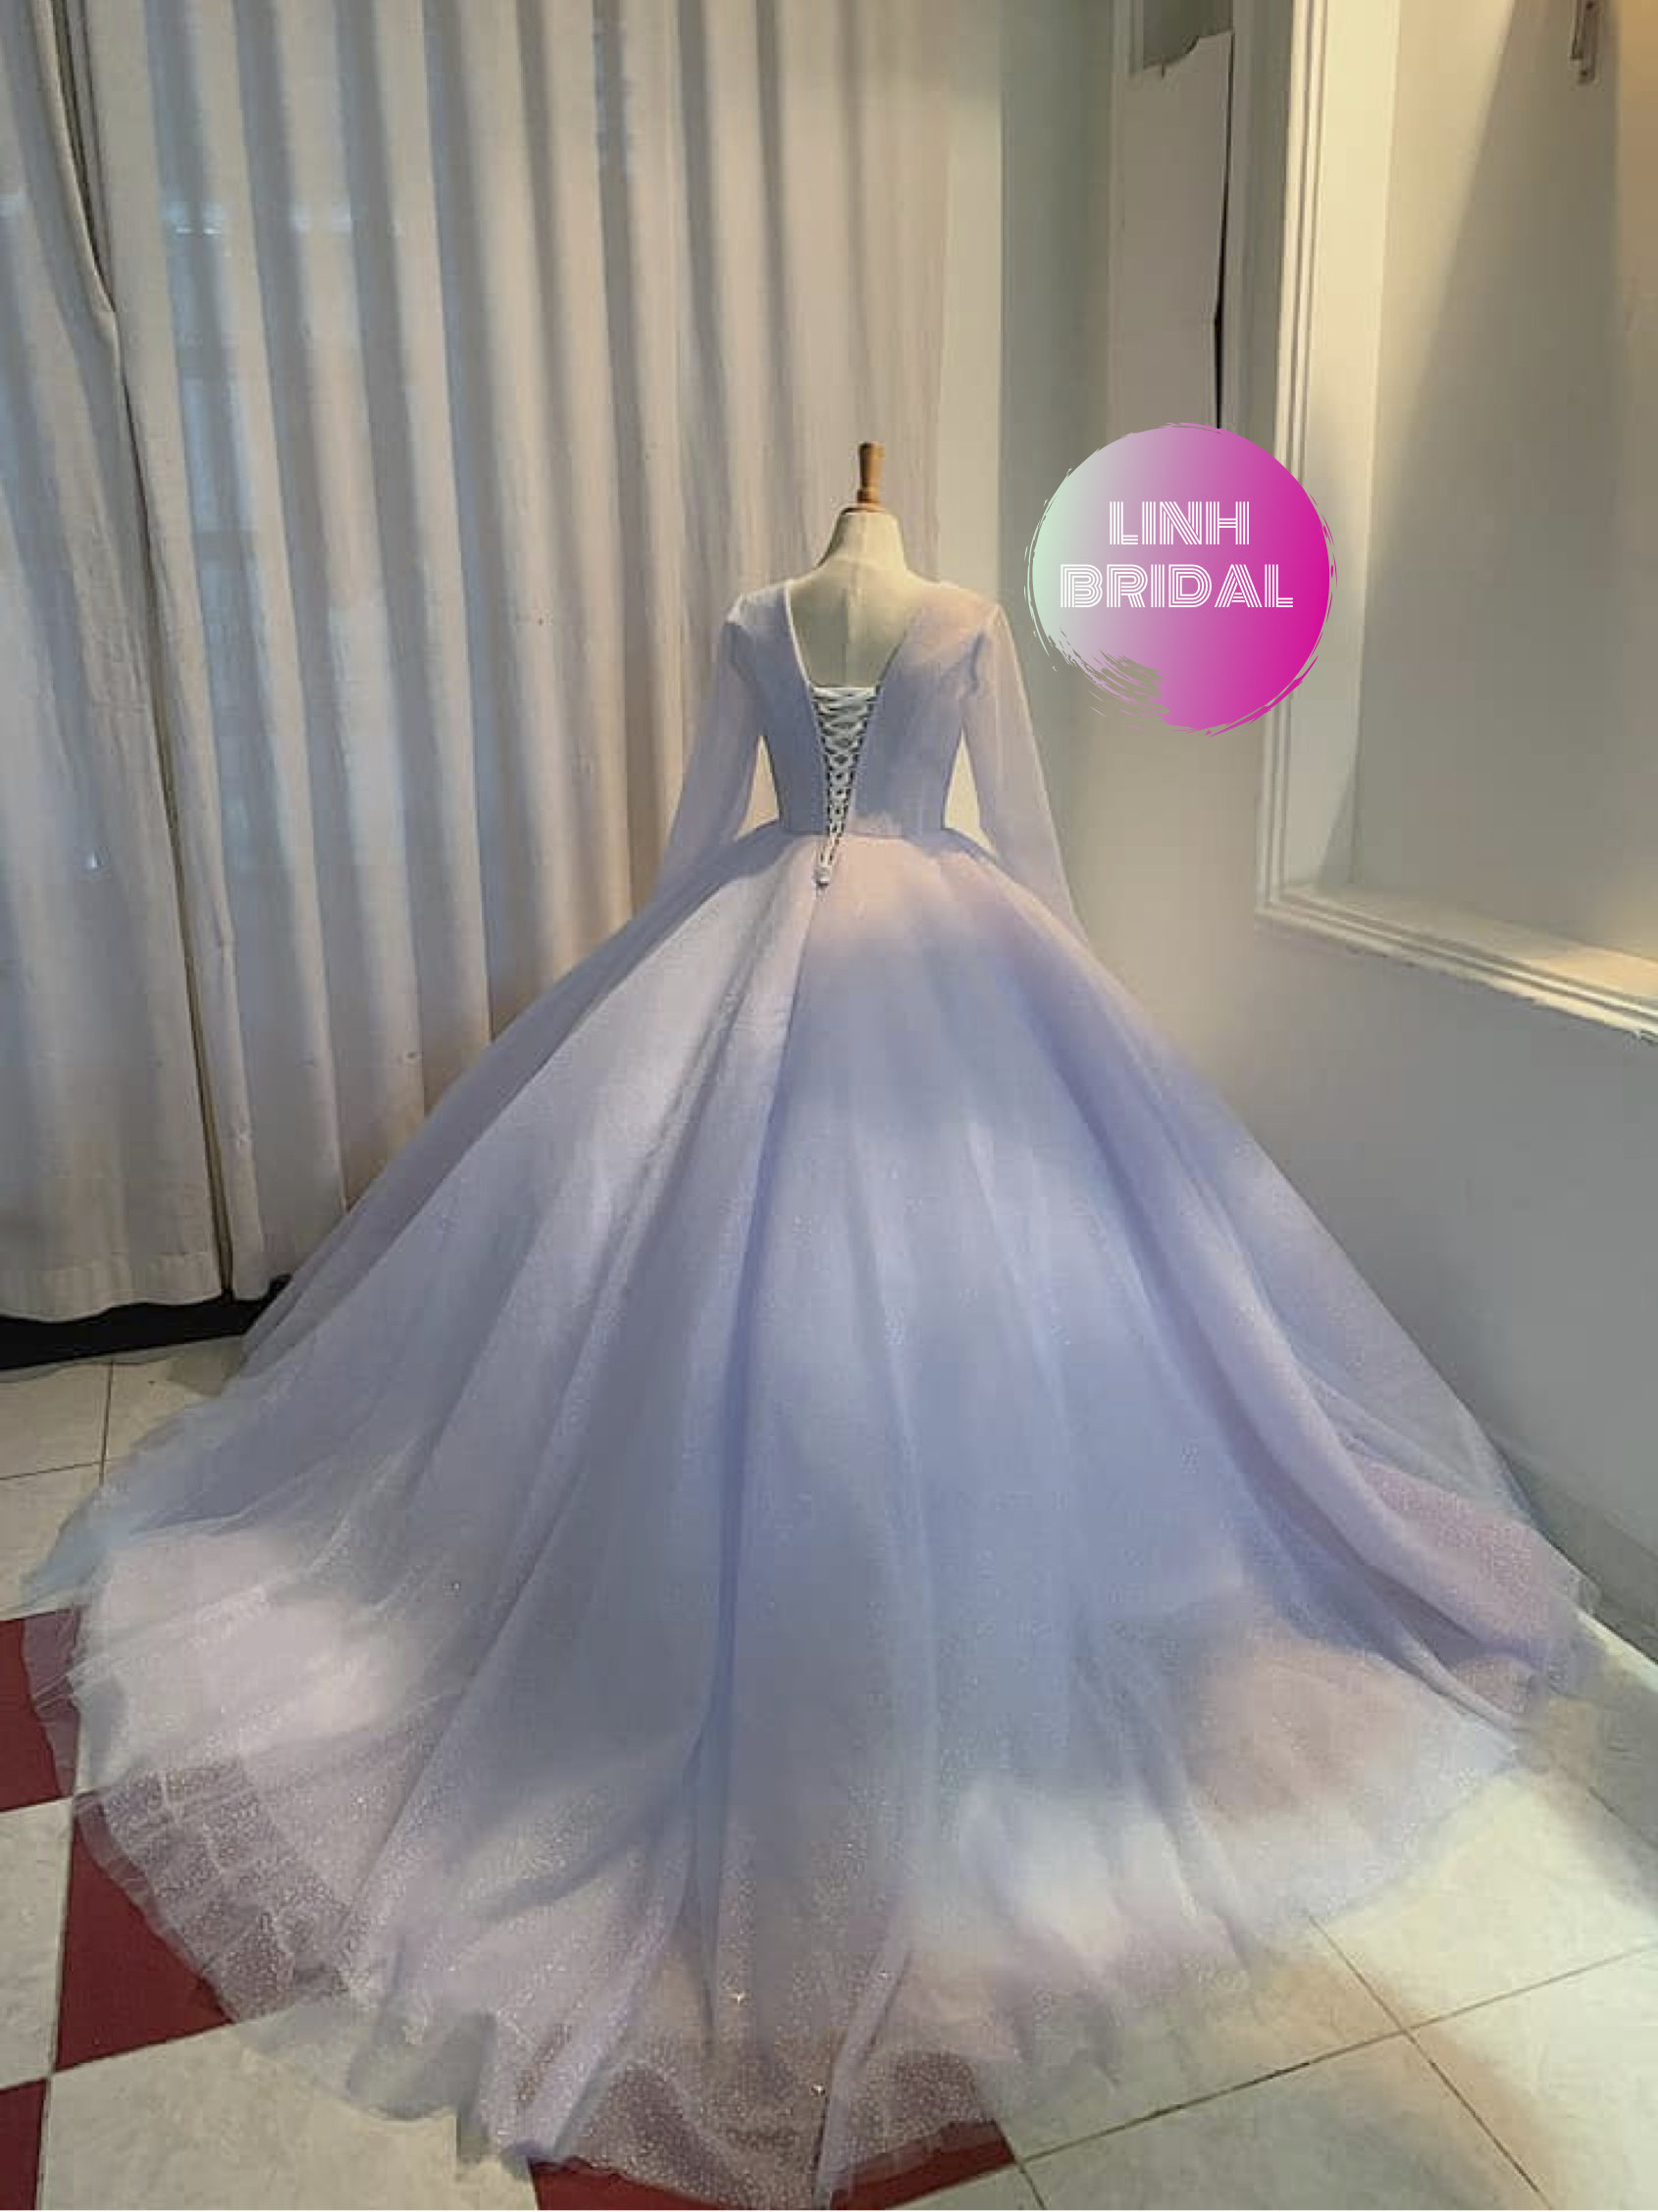 Custom Couture Purple Wedding Gown Iris Tulle Dress With 3d Flowers Beading  Lace Evening Dresses Chic Dress For Photoshoot Dress - Evening Dresses -  AliExpress